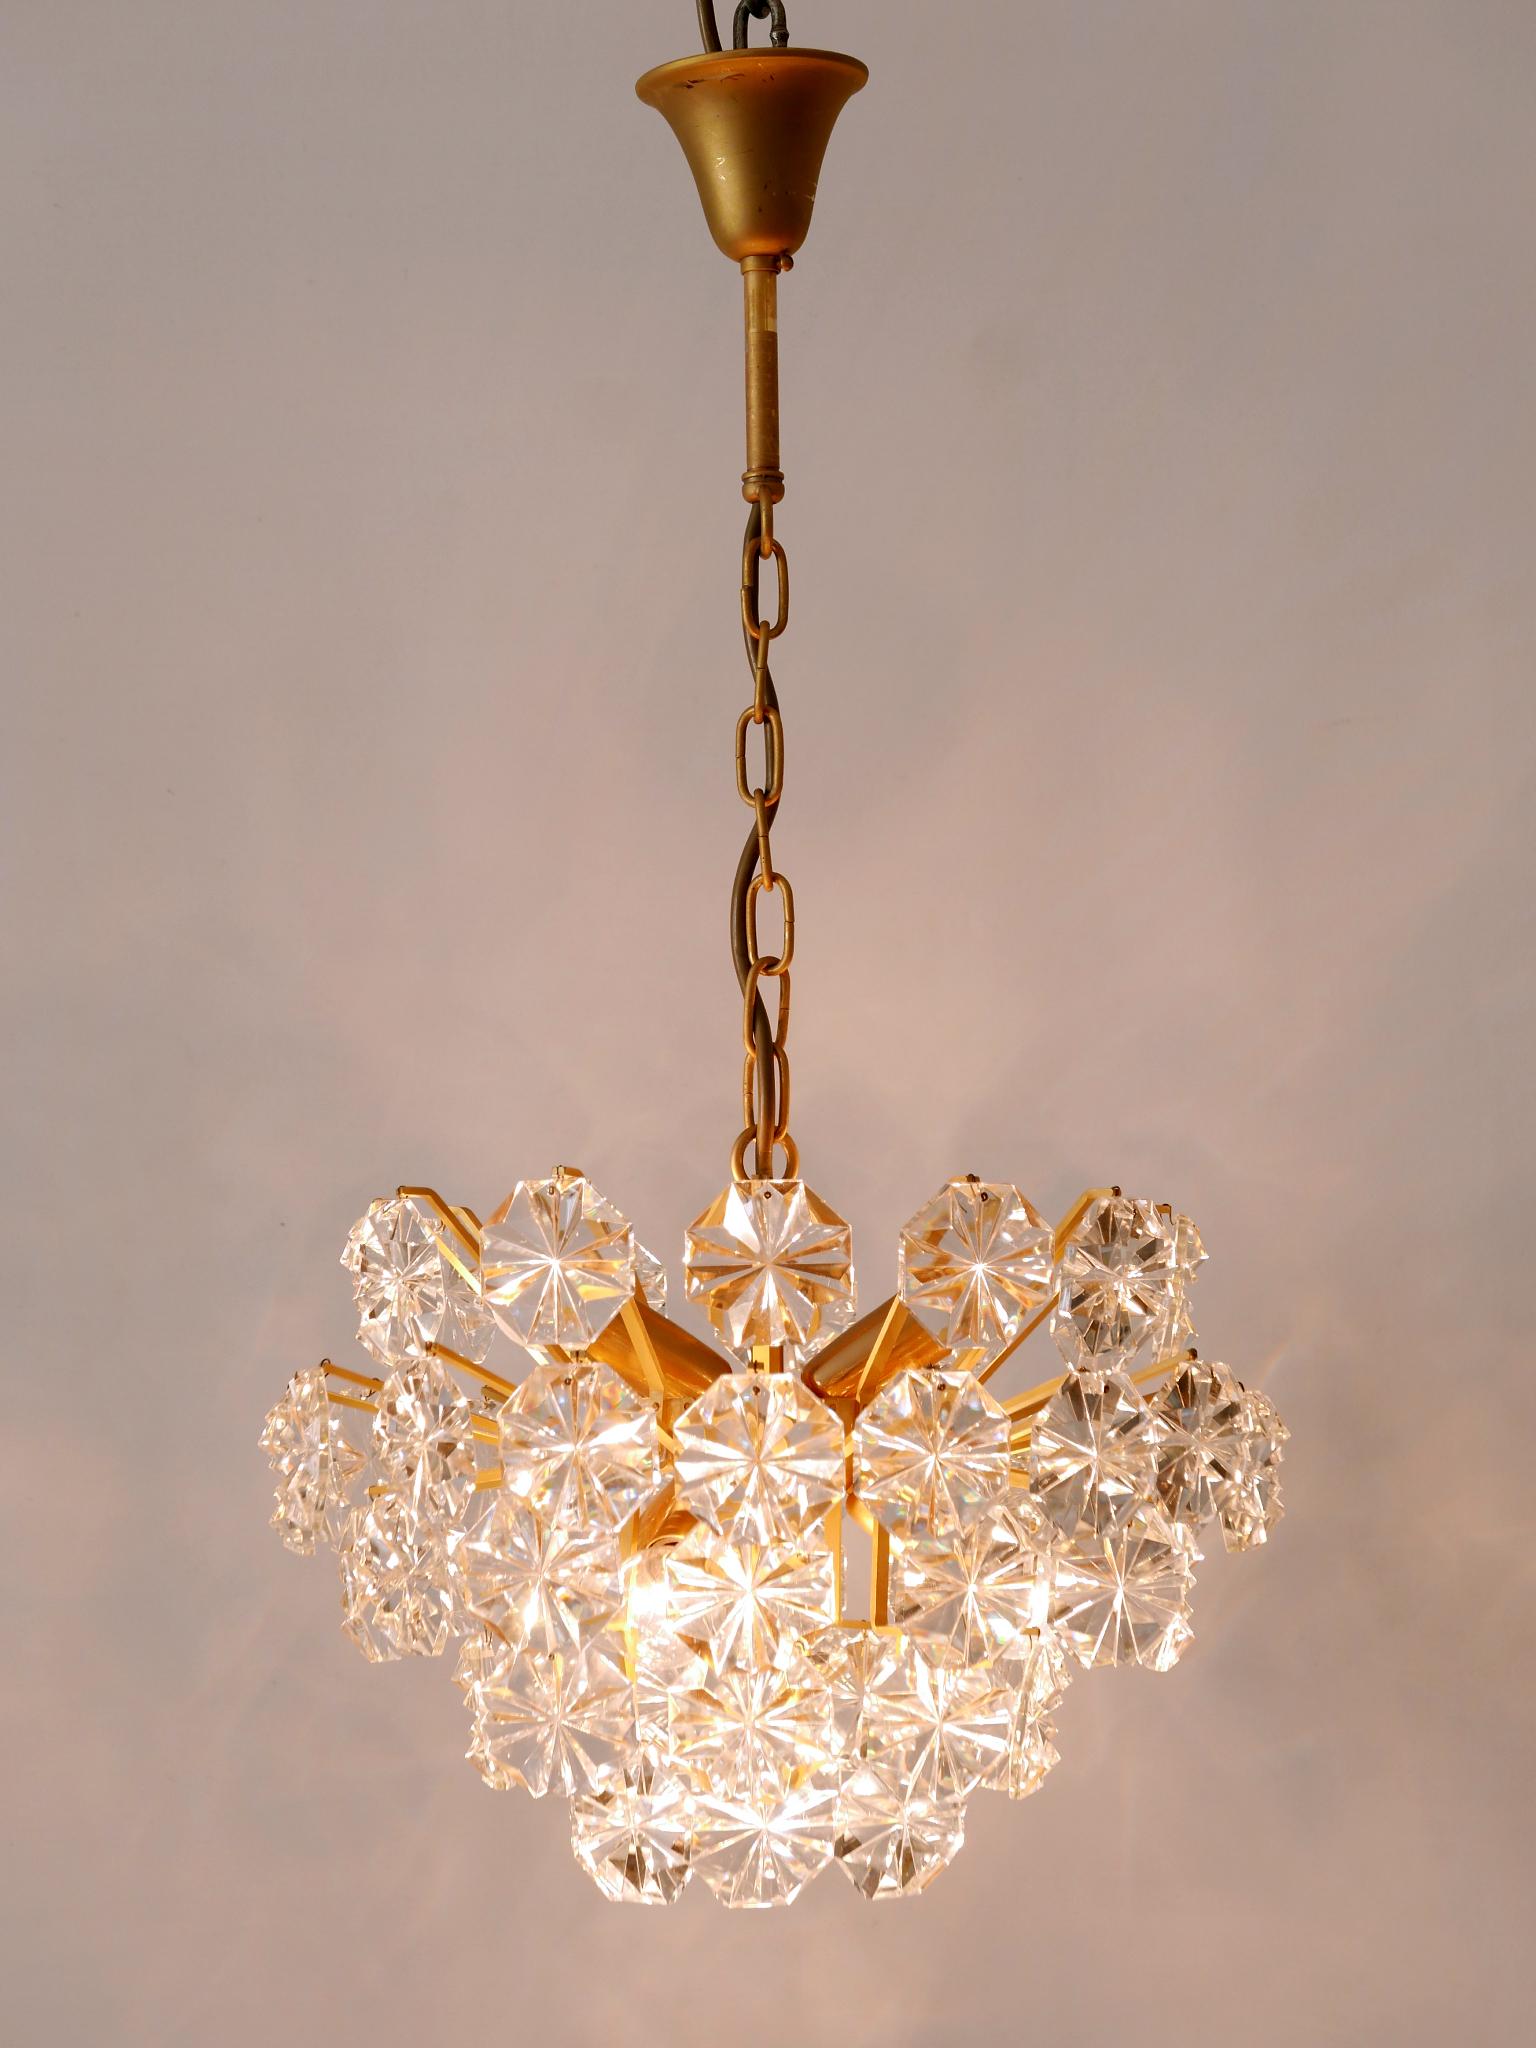 Rare and stunning Mid Century Modern gilt brass and crystal glass 6-flamed chandelier or pendant lamp. Designed and manufactured by Christoph Palme, Germany, 1970s. Label inside the canopy.

Attention please: The crystal glass parts will be taken